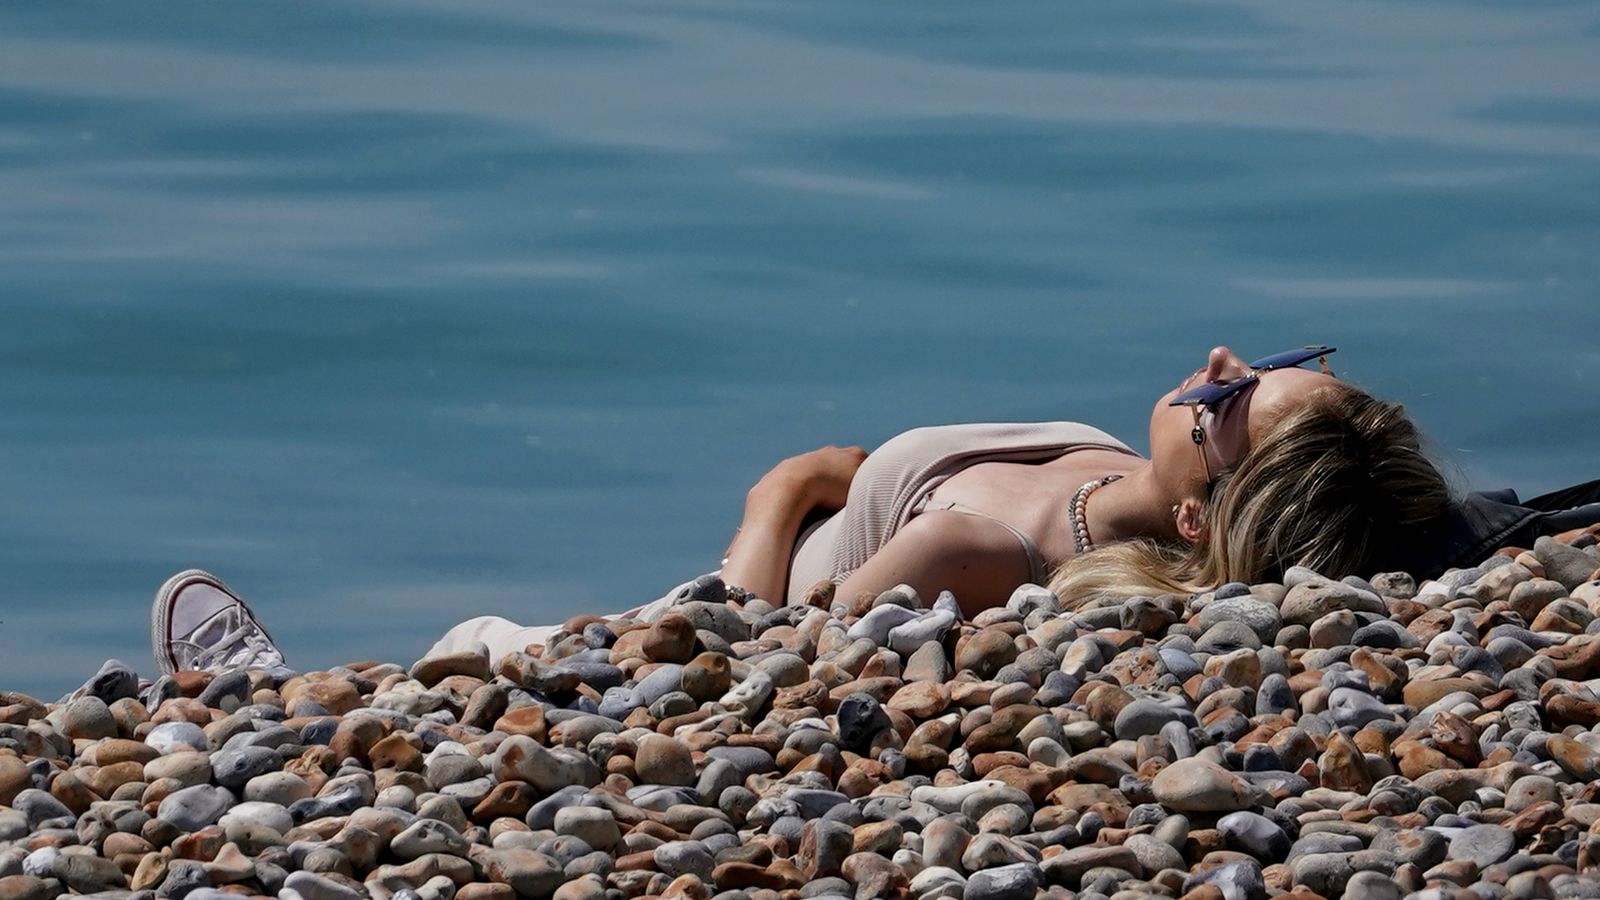 UK weather: It's the hottest day of the year so far - and it could get warmer this weekend